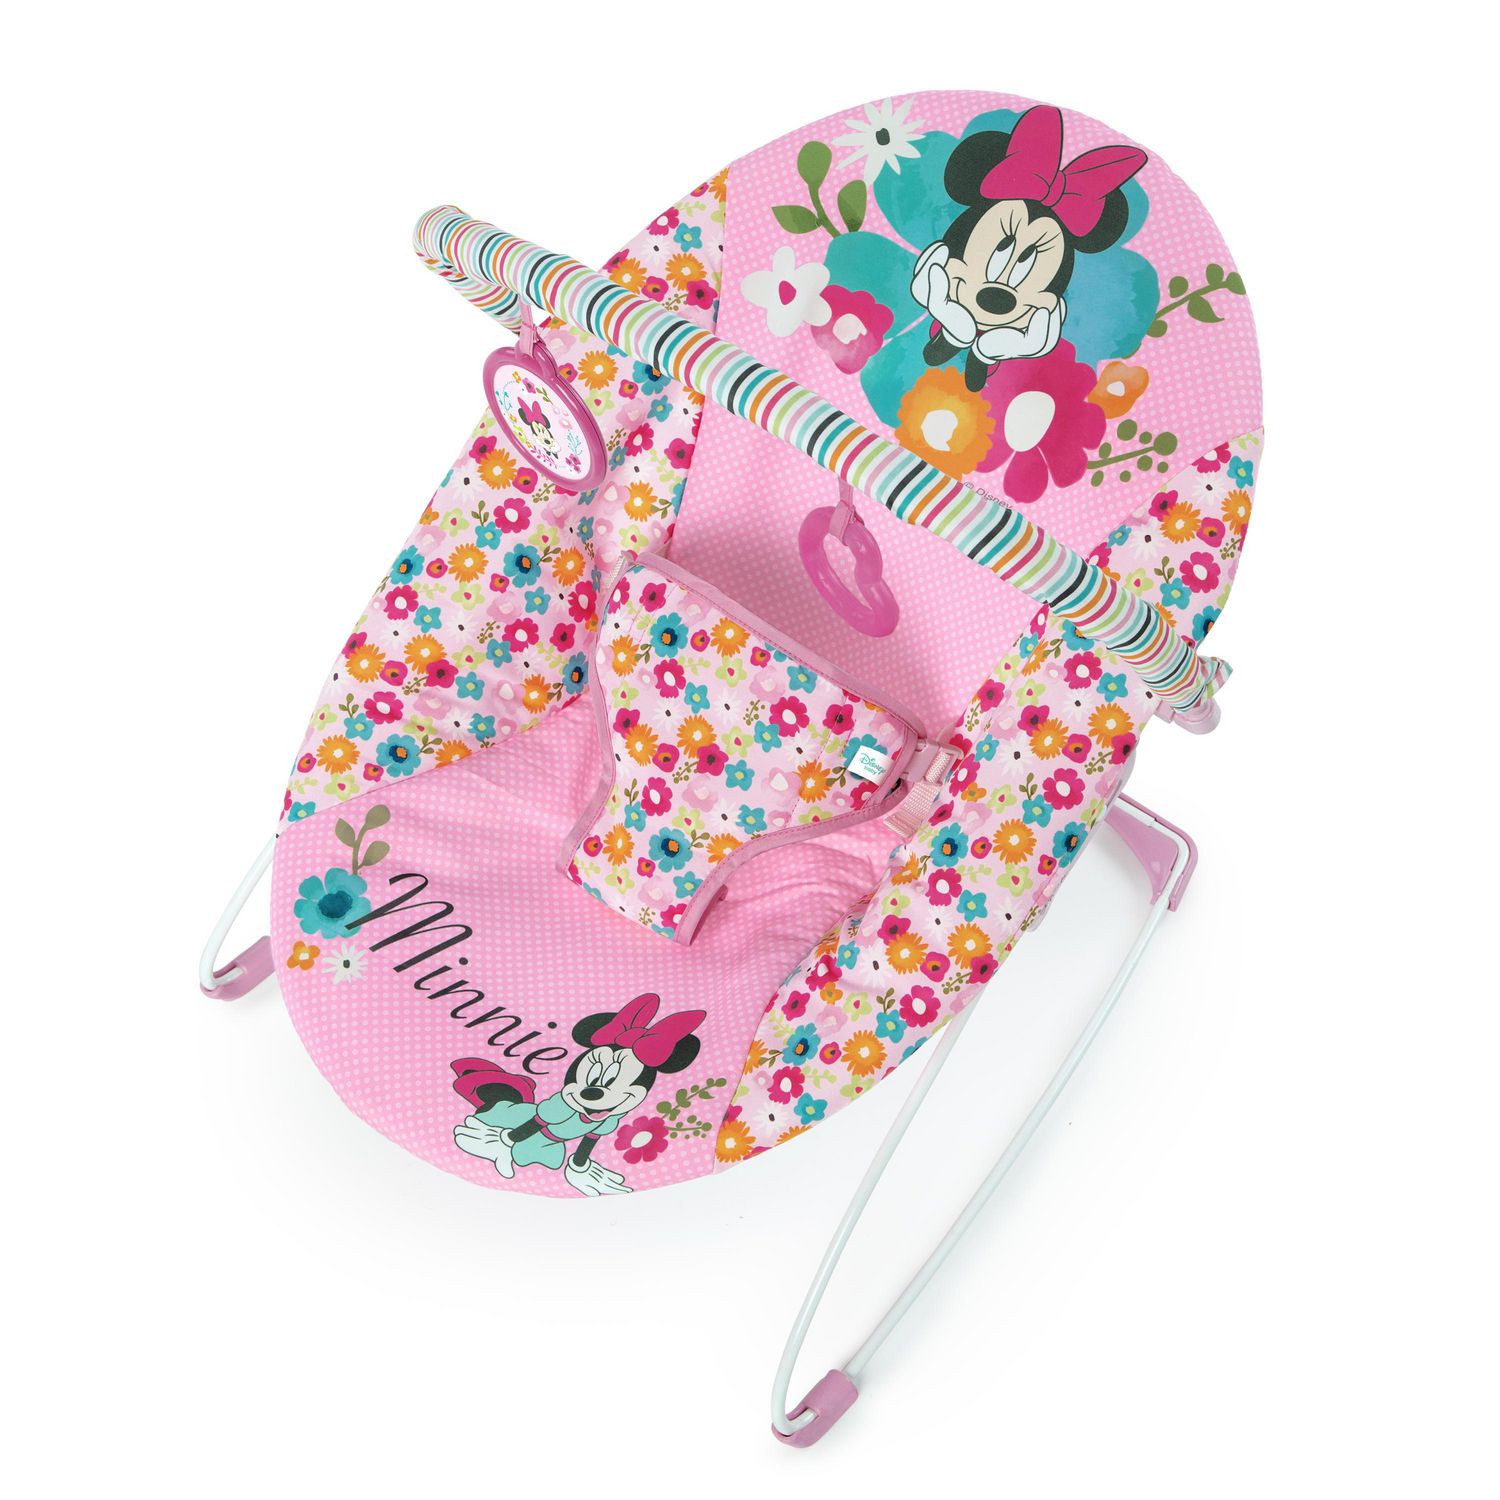 bright starts bouncer minnie mouse